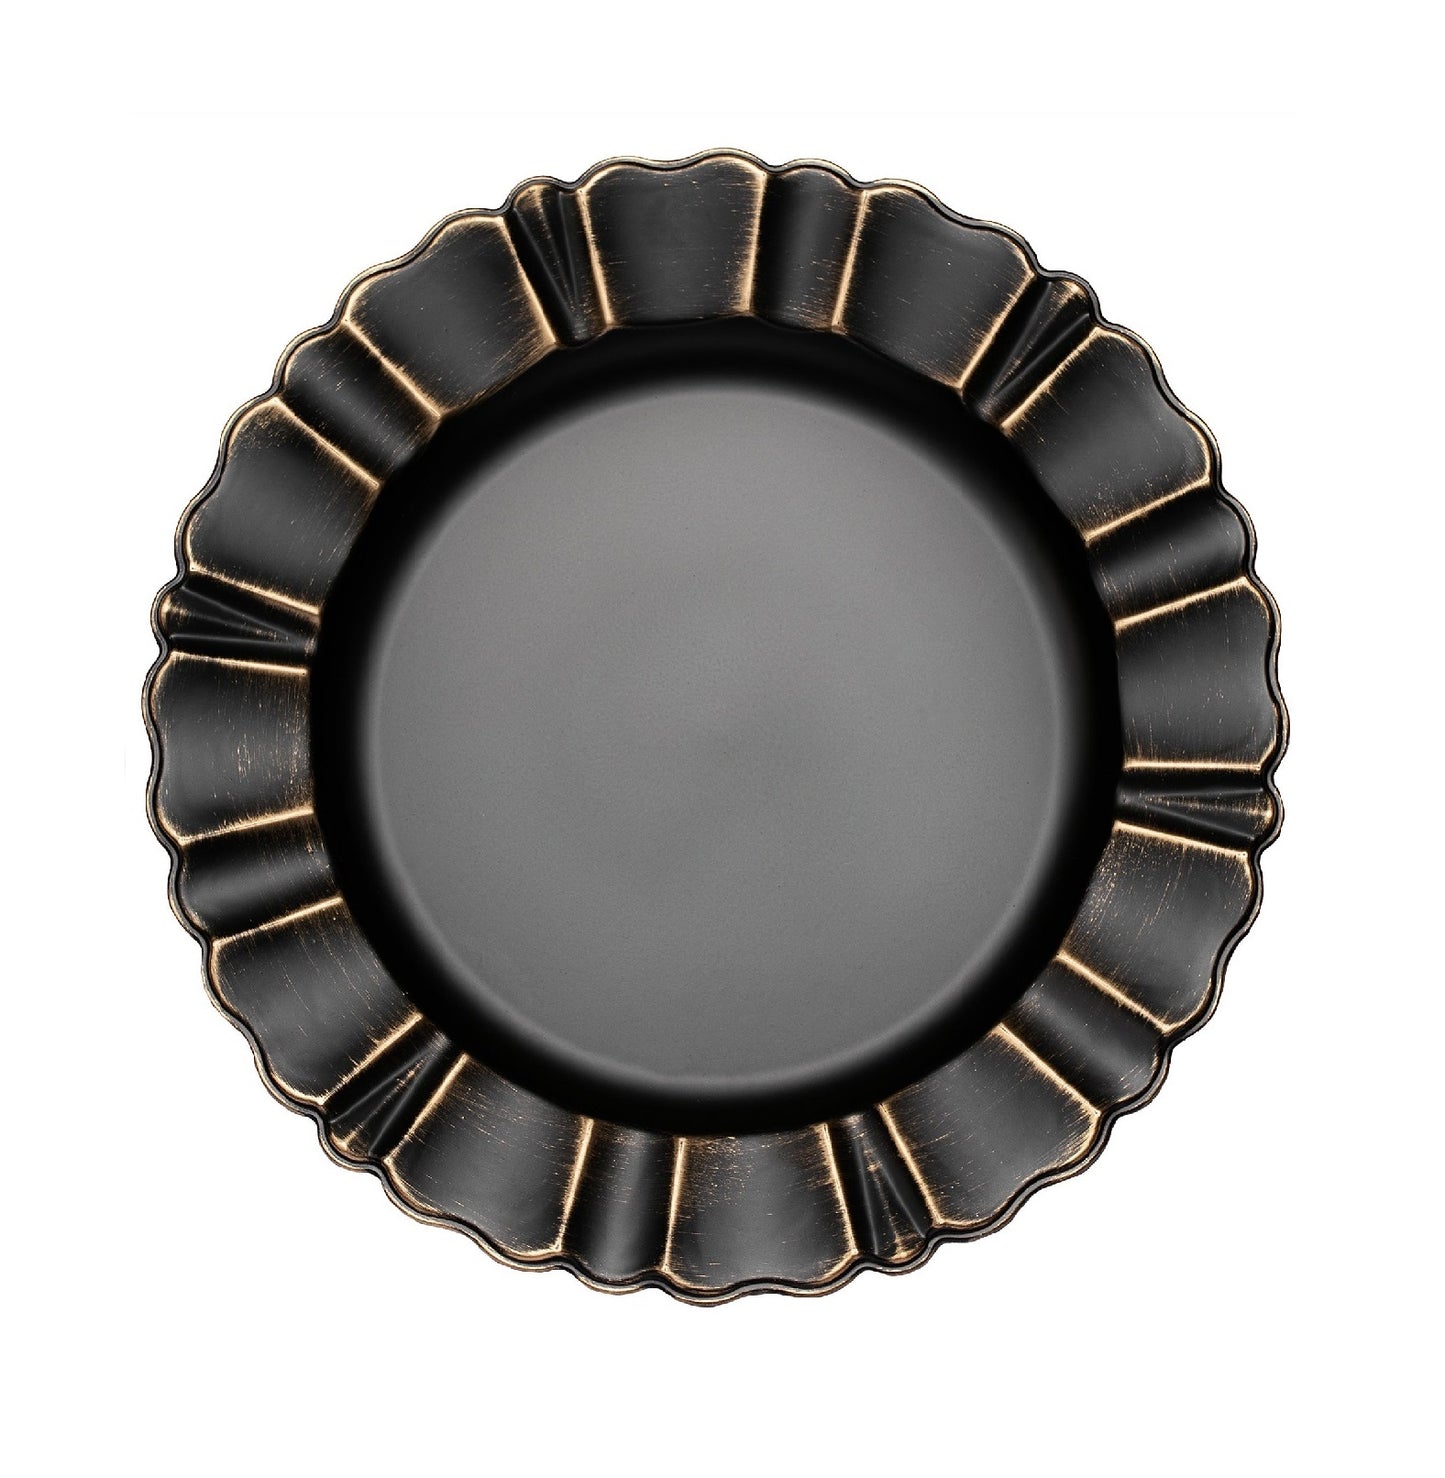 Waved Scalloped Charger Plate (Black & Gold)